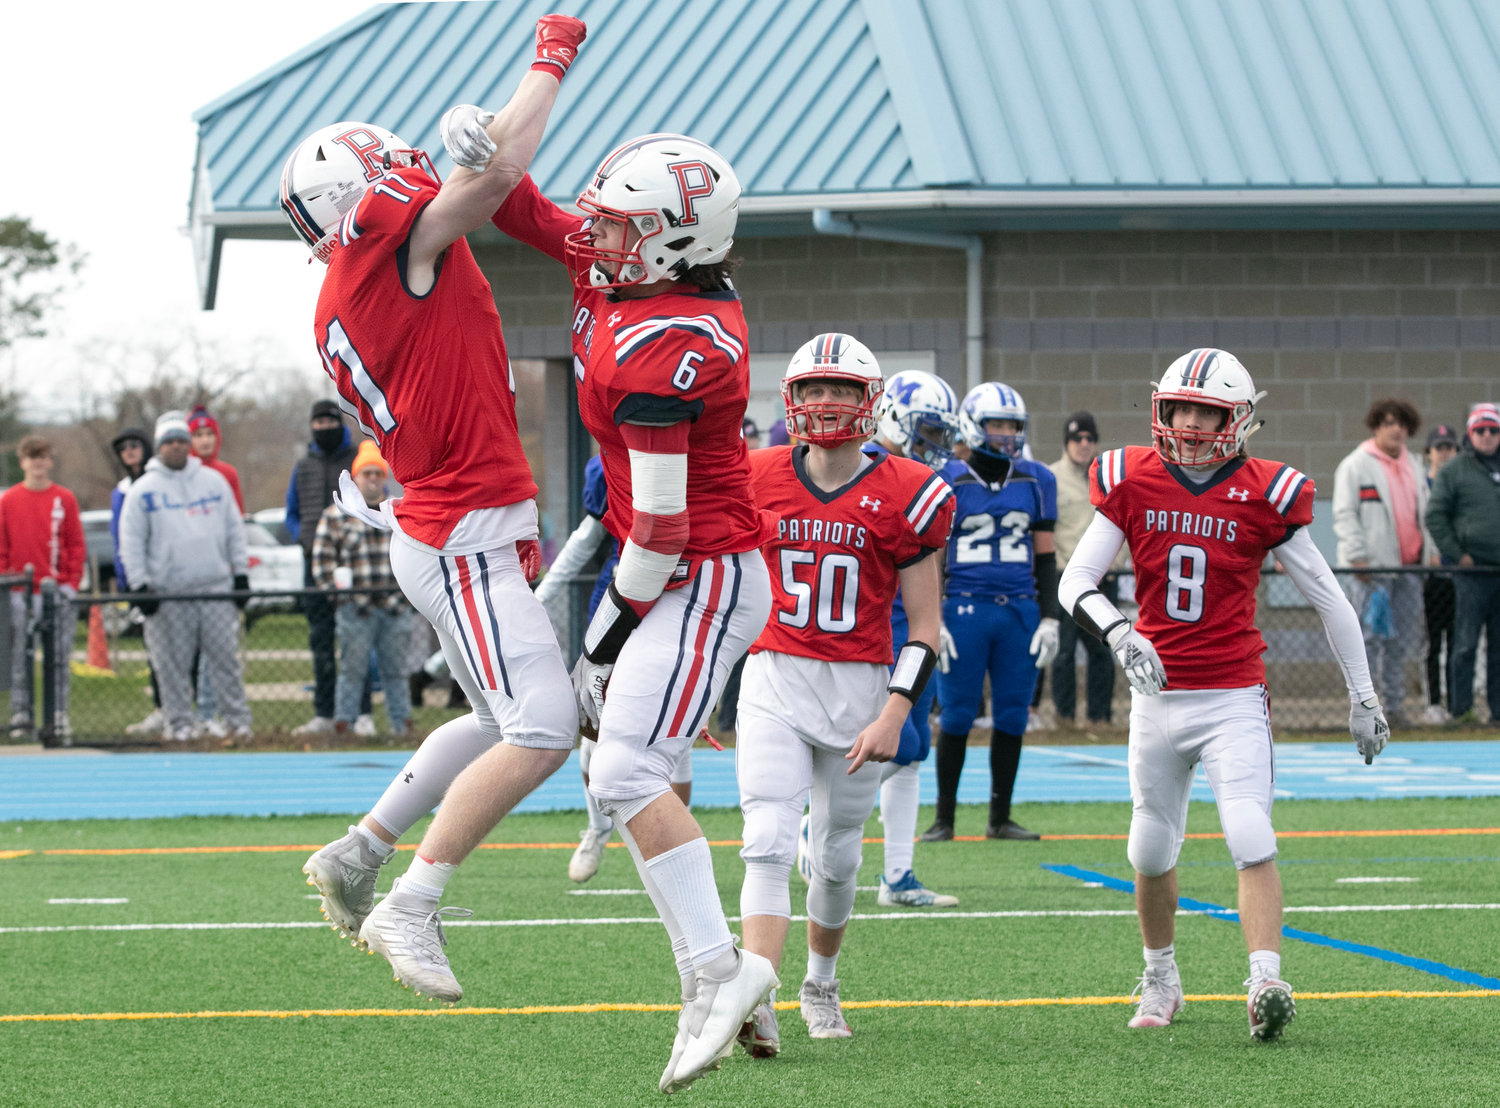 Gavin Bicho (left) celebrates with Marcus Evans after the latter scored a touchdown in the second half. Henry Rodrigues (left) and Jack Cianciolo are ready to join them.